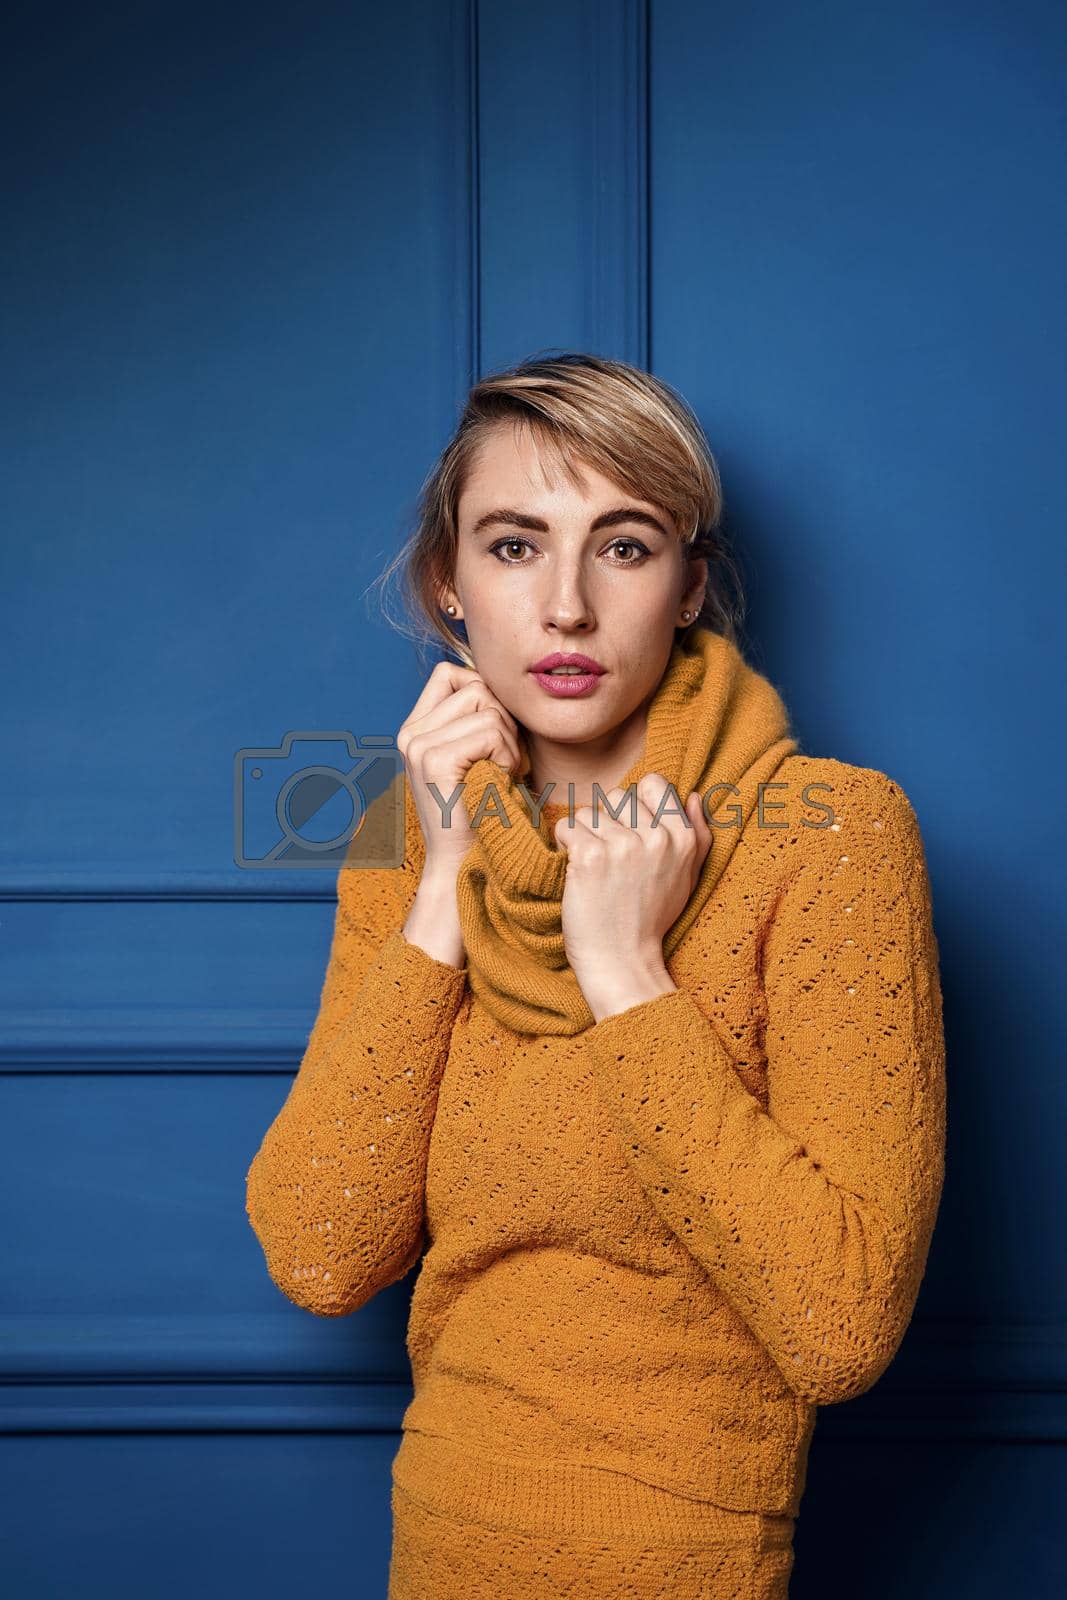 Royalty free image of Studio portrait of a young woman in yellow pullover on blue wall background. by berezko